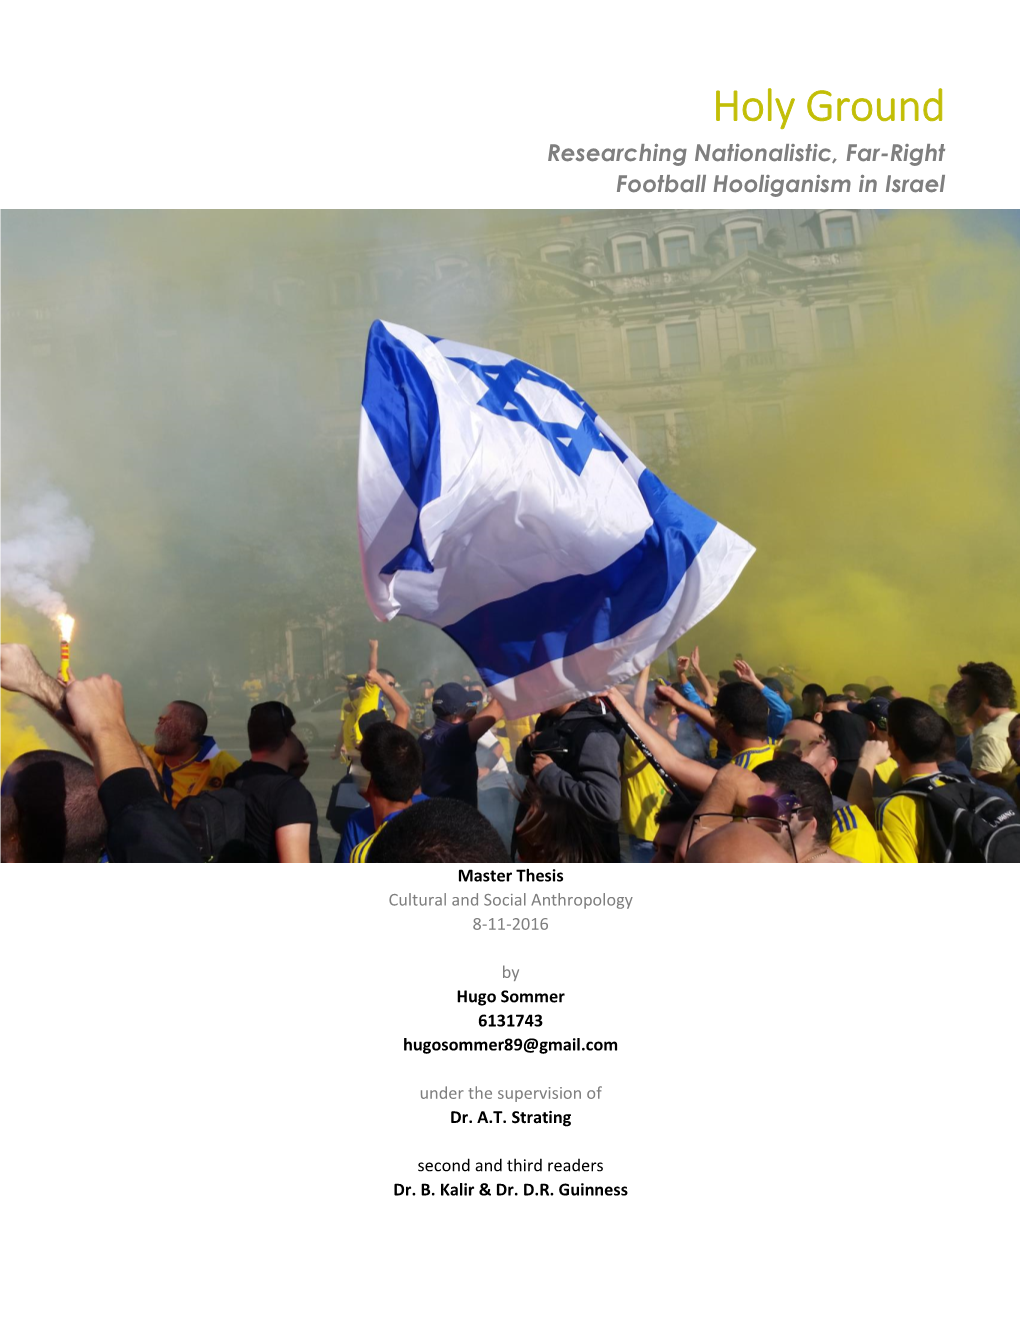 Holy Ground Researching Nationalistic, Far-Right Football Hooliganism in Israel